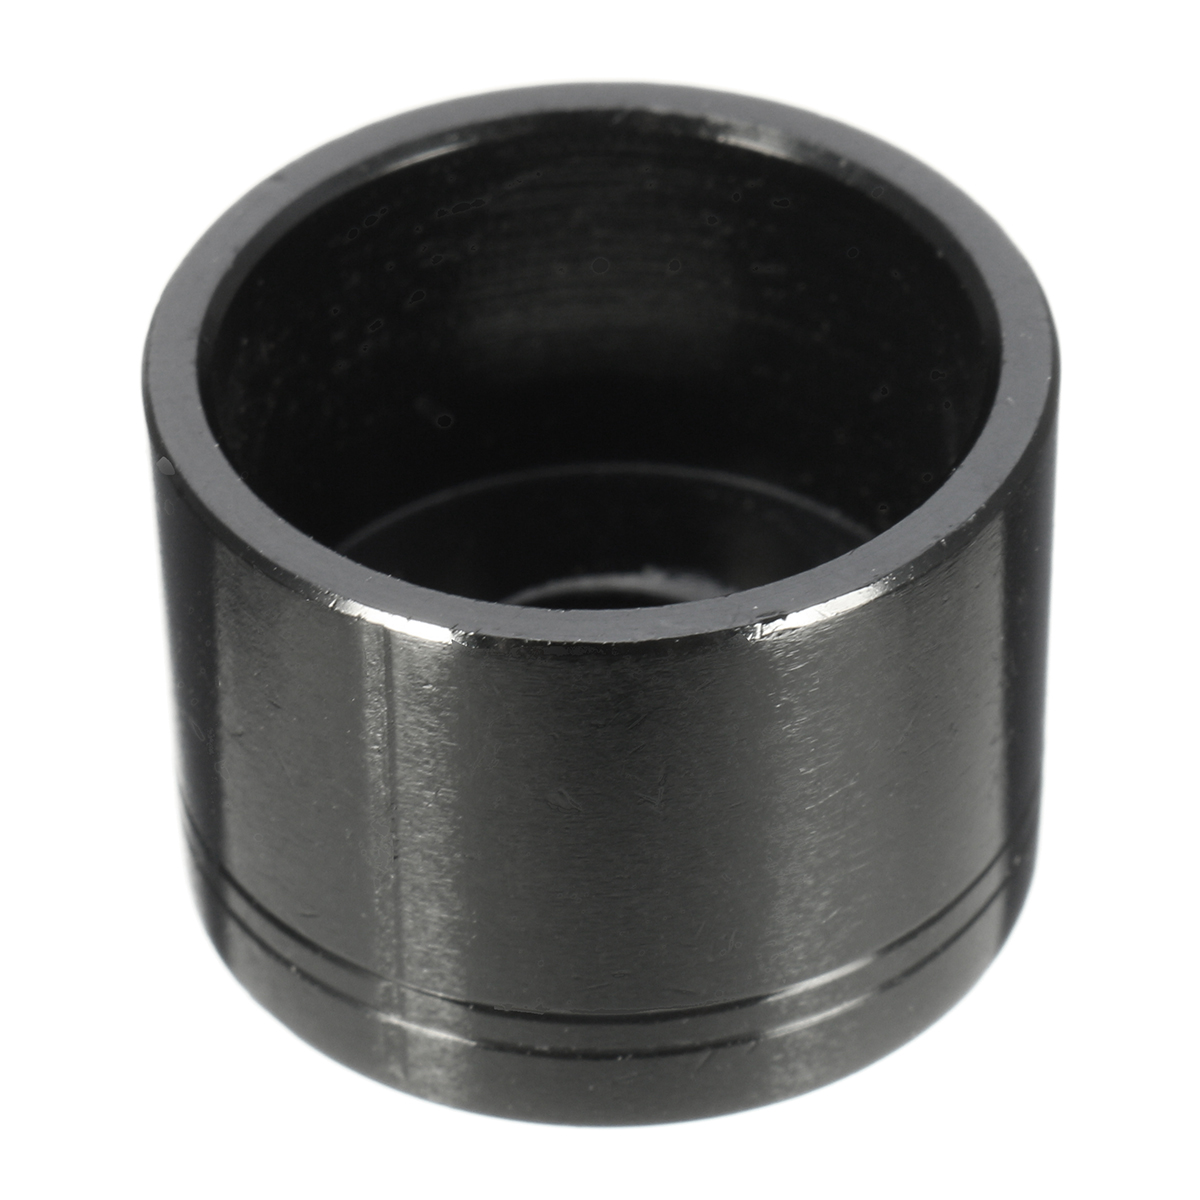 Black-Lift-Up-Reverse-Lockout-Shifter-Shift-Knob-Adapter-For-Manual-Shifters-1383781